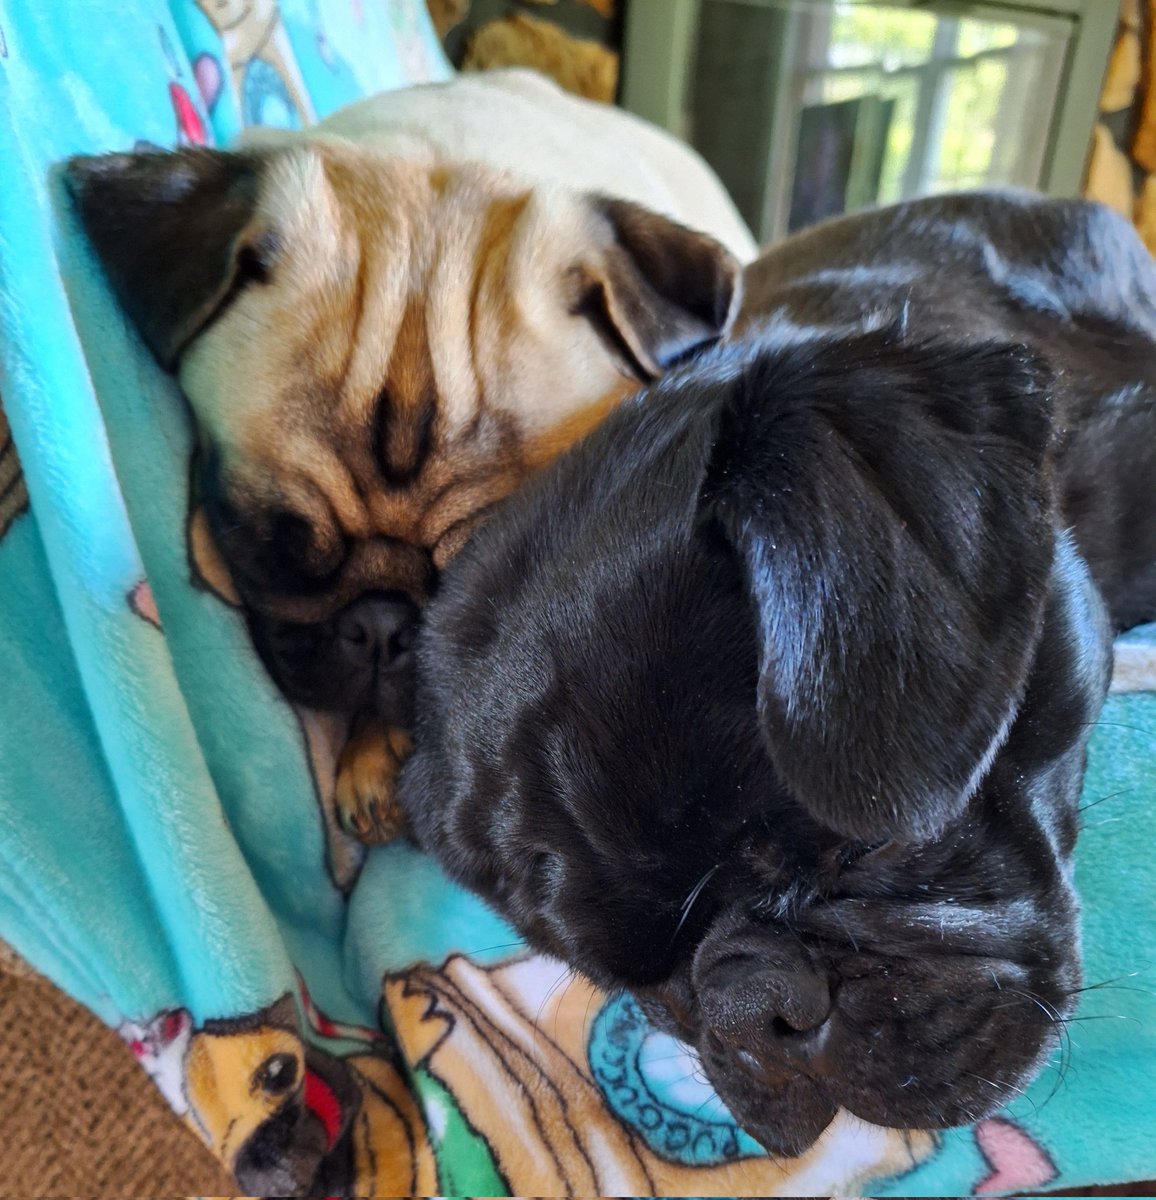 #MondayMood 
We're gonna stay right here on the recliner & let Monday pass on by.  How bout' you? #puglife #dogsoftwitter #dogsofx #pugsoftwitter #sleepy #pugs #Zinny #Winny #HappyMonday #TwitterFriends